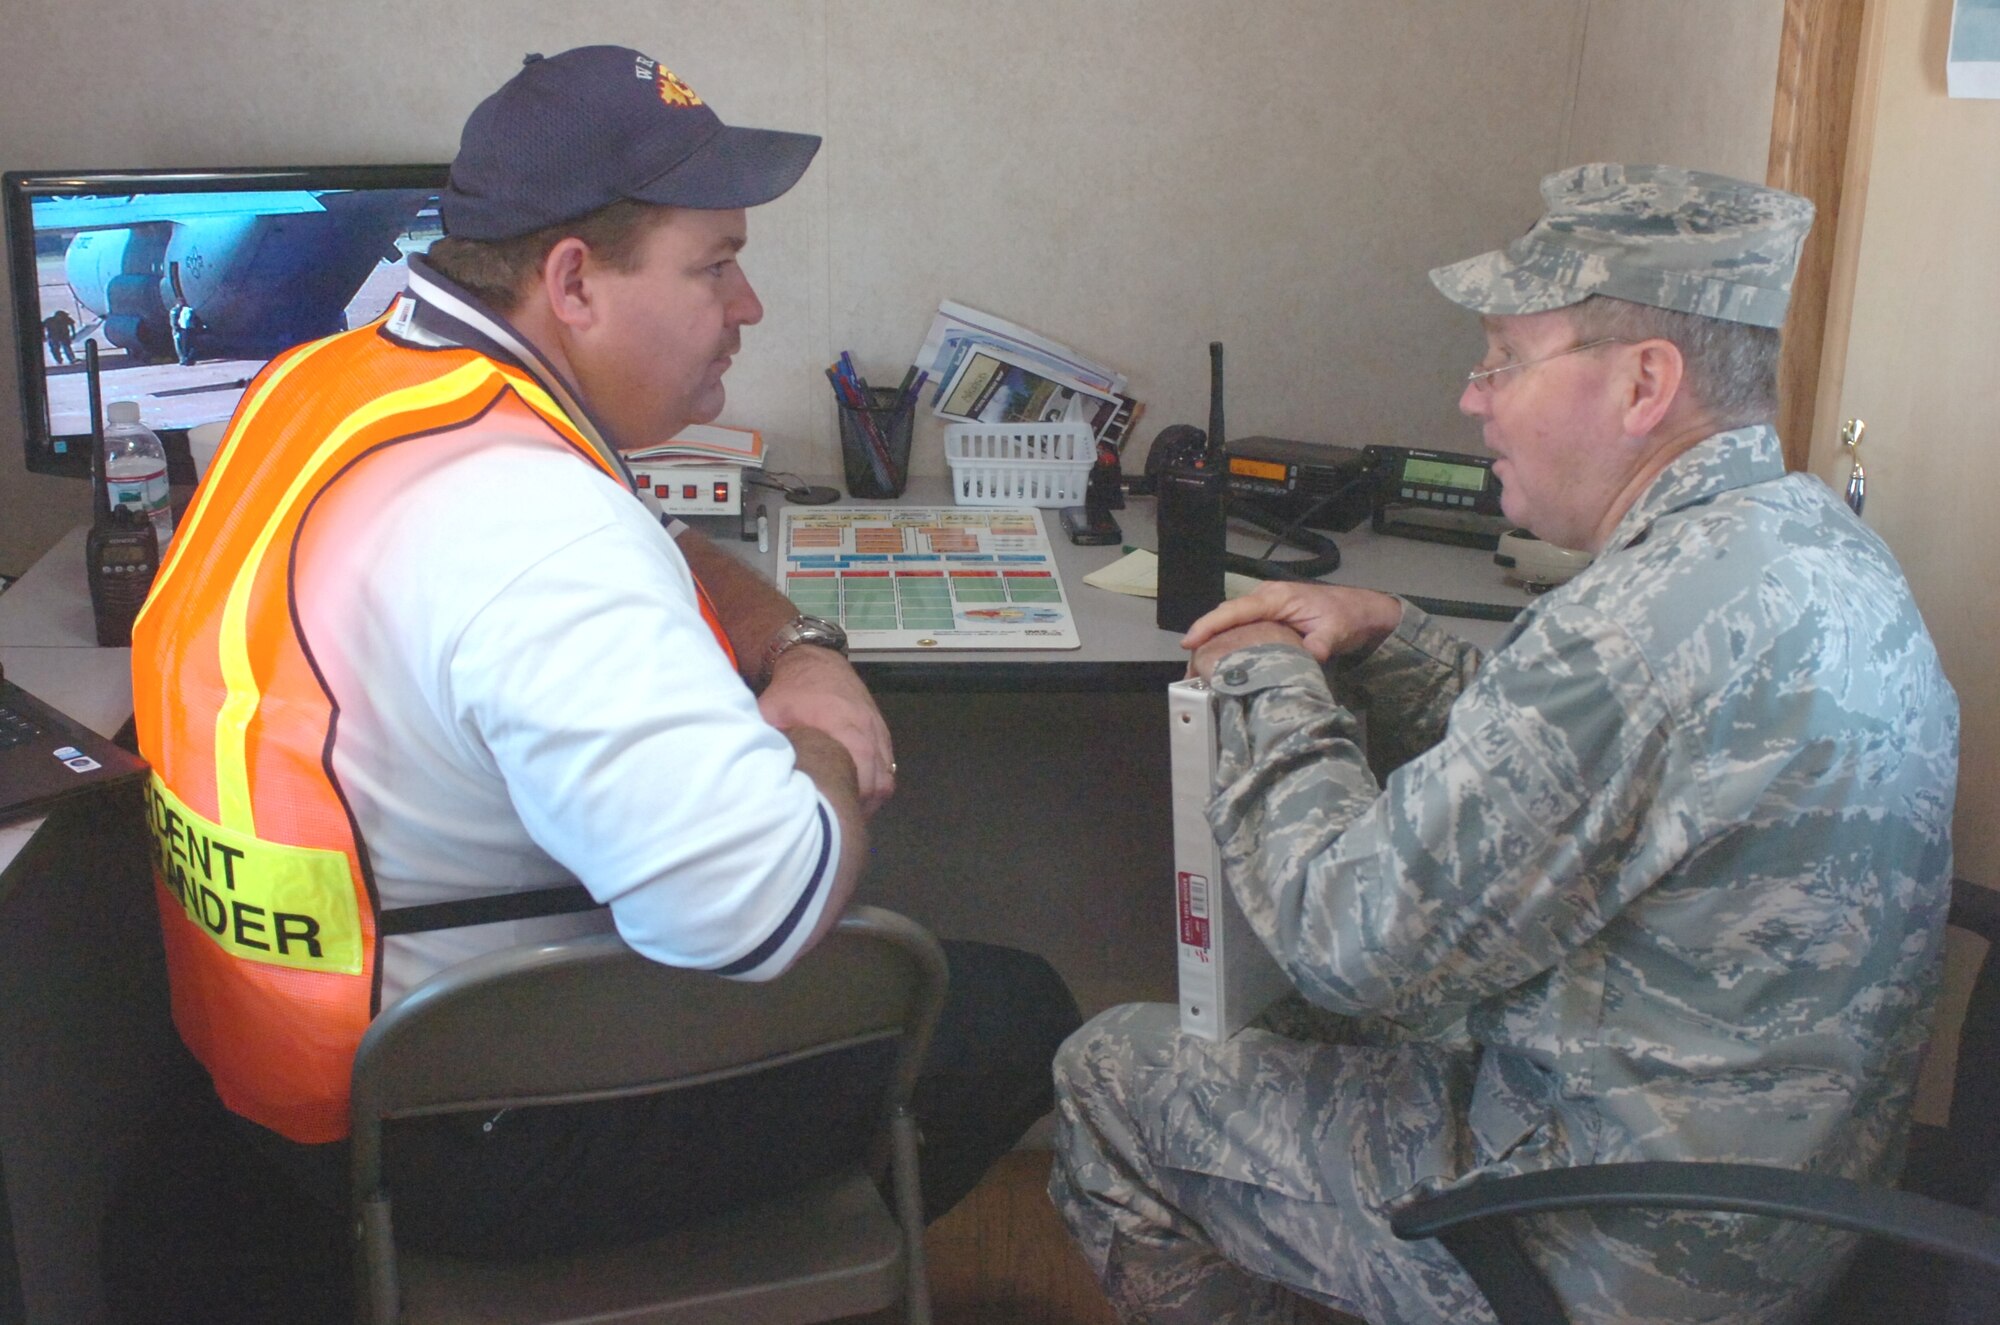 Lt. Col. Stanley Evans, commander of the 61st Civil Support Team, (right) discusses entry procedures and containment options for a hazardous chemical  with Walnut Ridge Fire Chief Alan Haskins, incident commander during an exercise at the Walnut Ridge Airport on Tuesday, September 1, 2009.  The exercise involved a scenario where a C-130 from the Arkansas Air National Guard was carrying a hazardous chemical which overturned during a hard landing at the airport.  The spill resulted in a compartment fire aboard the aircraft and the vapors from the chemical overcame the crew.  The aircraft and crew supporting the exercise for the local HAZMAT response drill came from the 189th Airlift Wing of the Arkansas Air National Guard located at Little Rock Air Force Base. (Photo by Maj. Keith Moore, public affairs officer for the Arkansas Air National Guard.) 